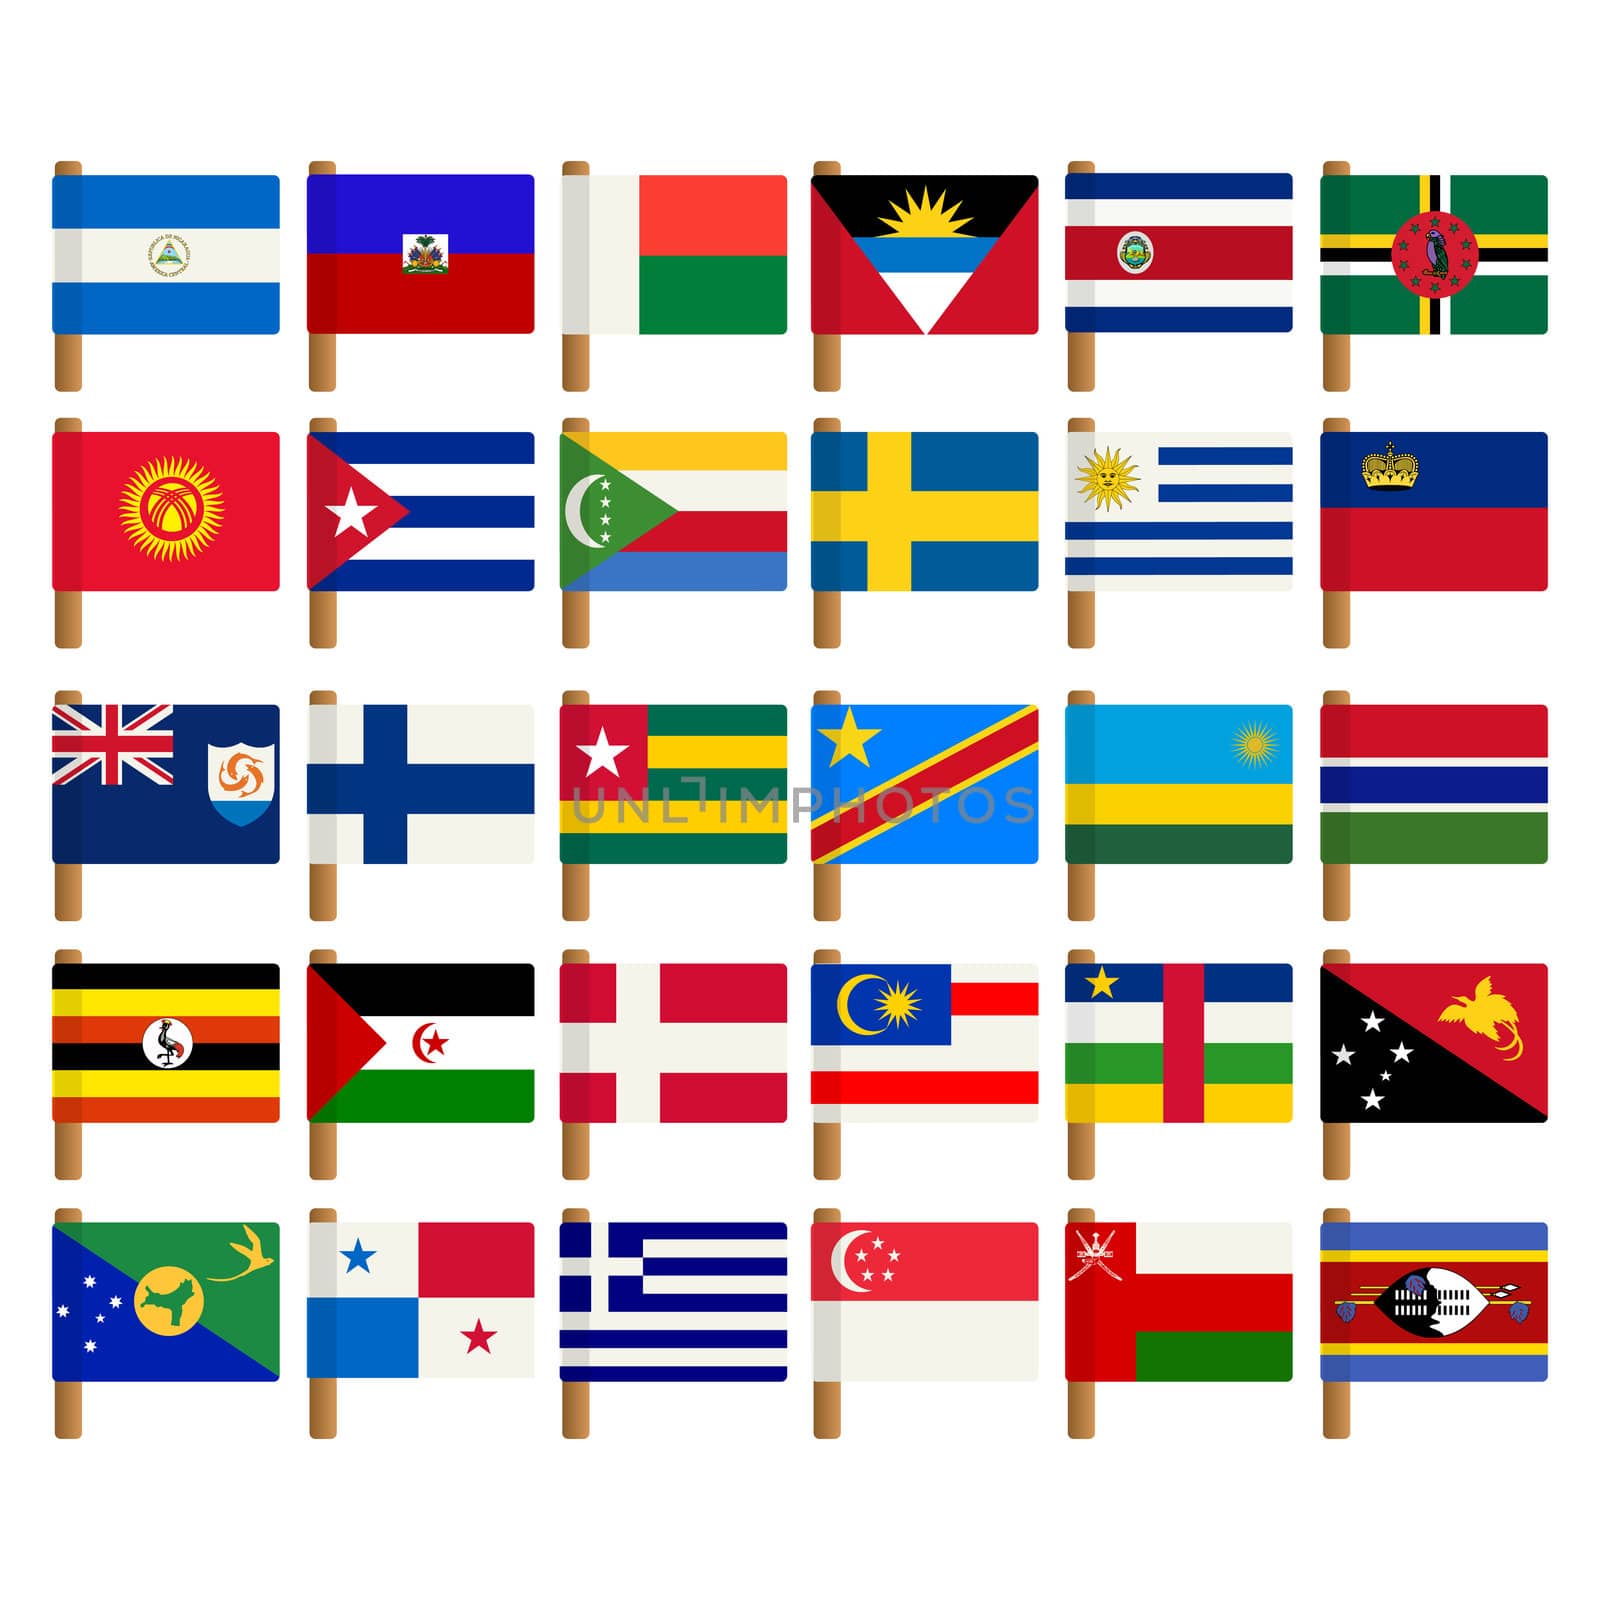 World flag icons set 7 by Lirch